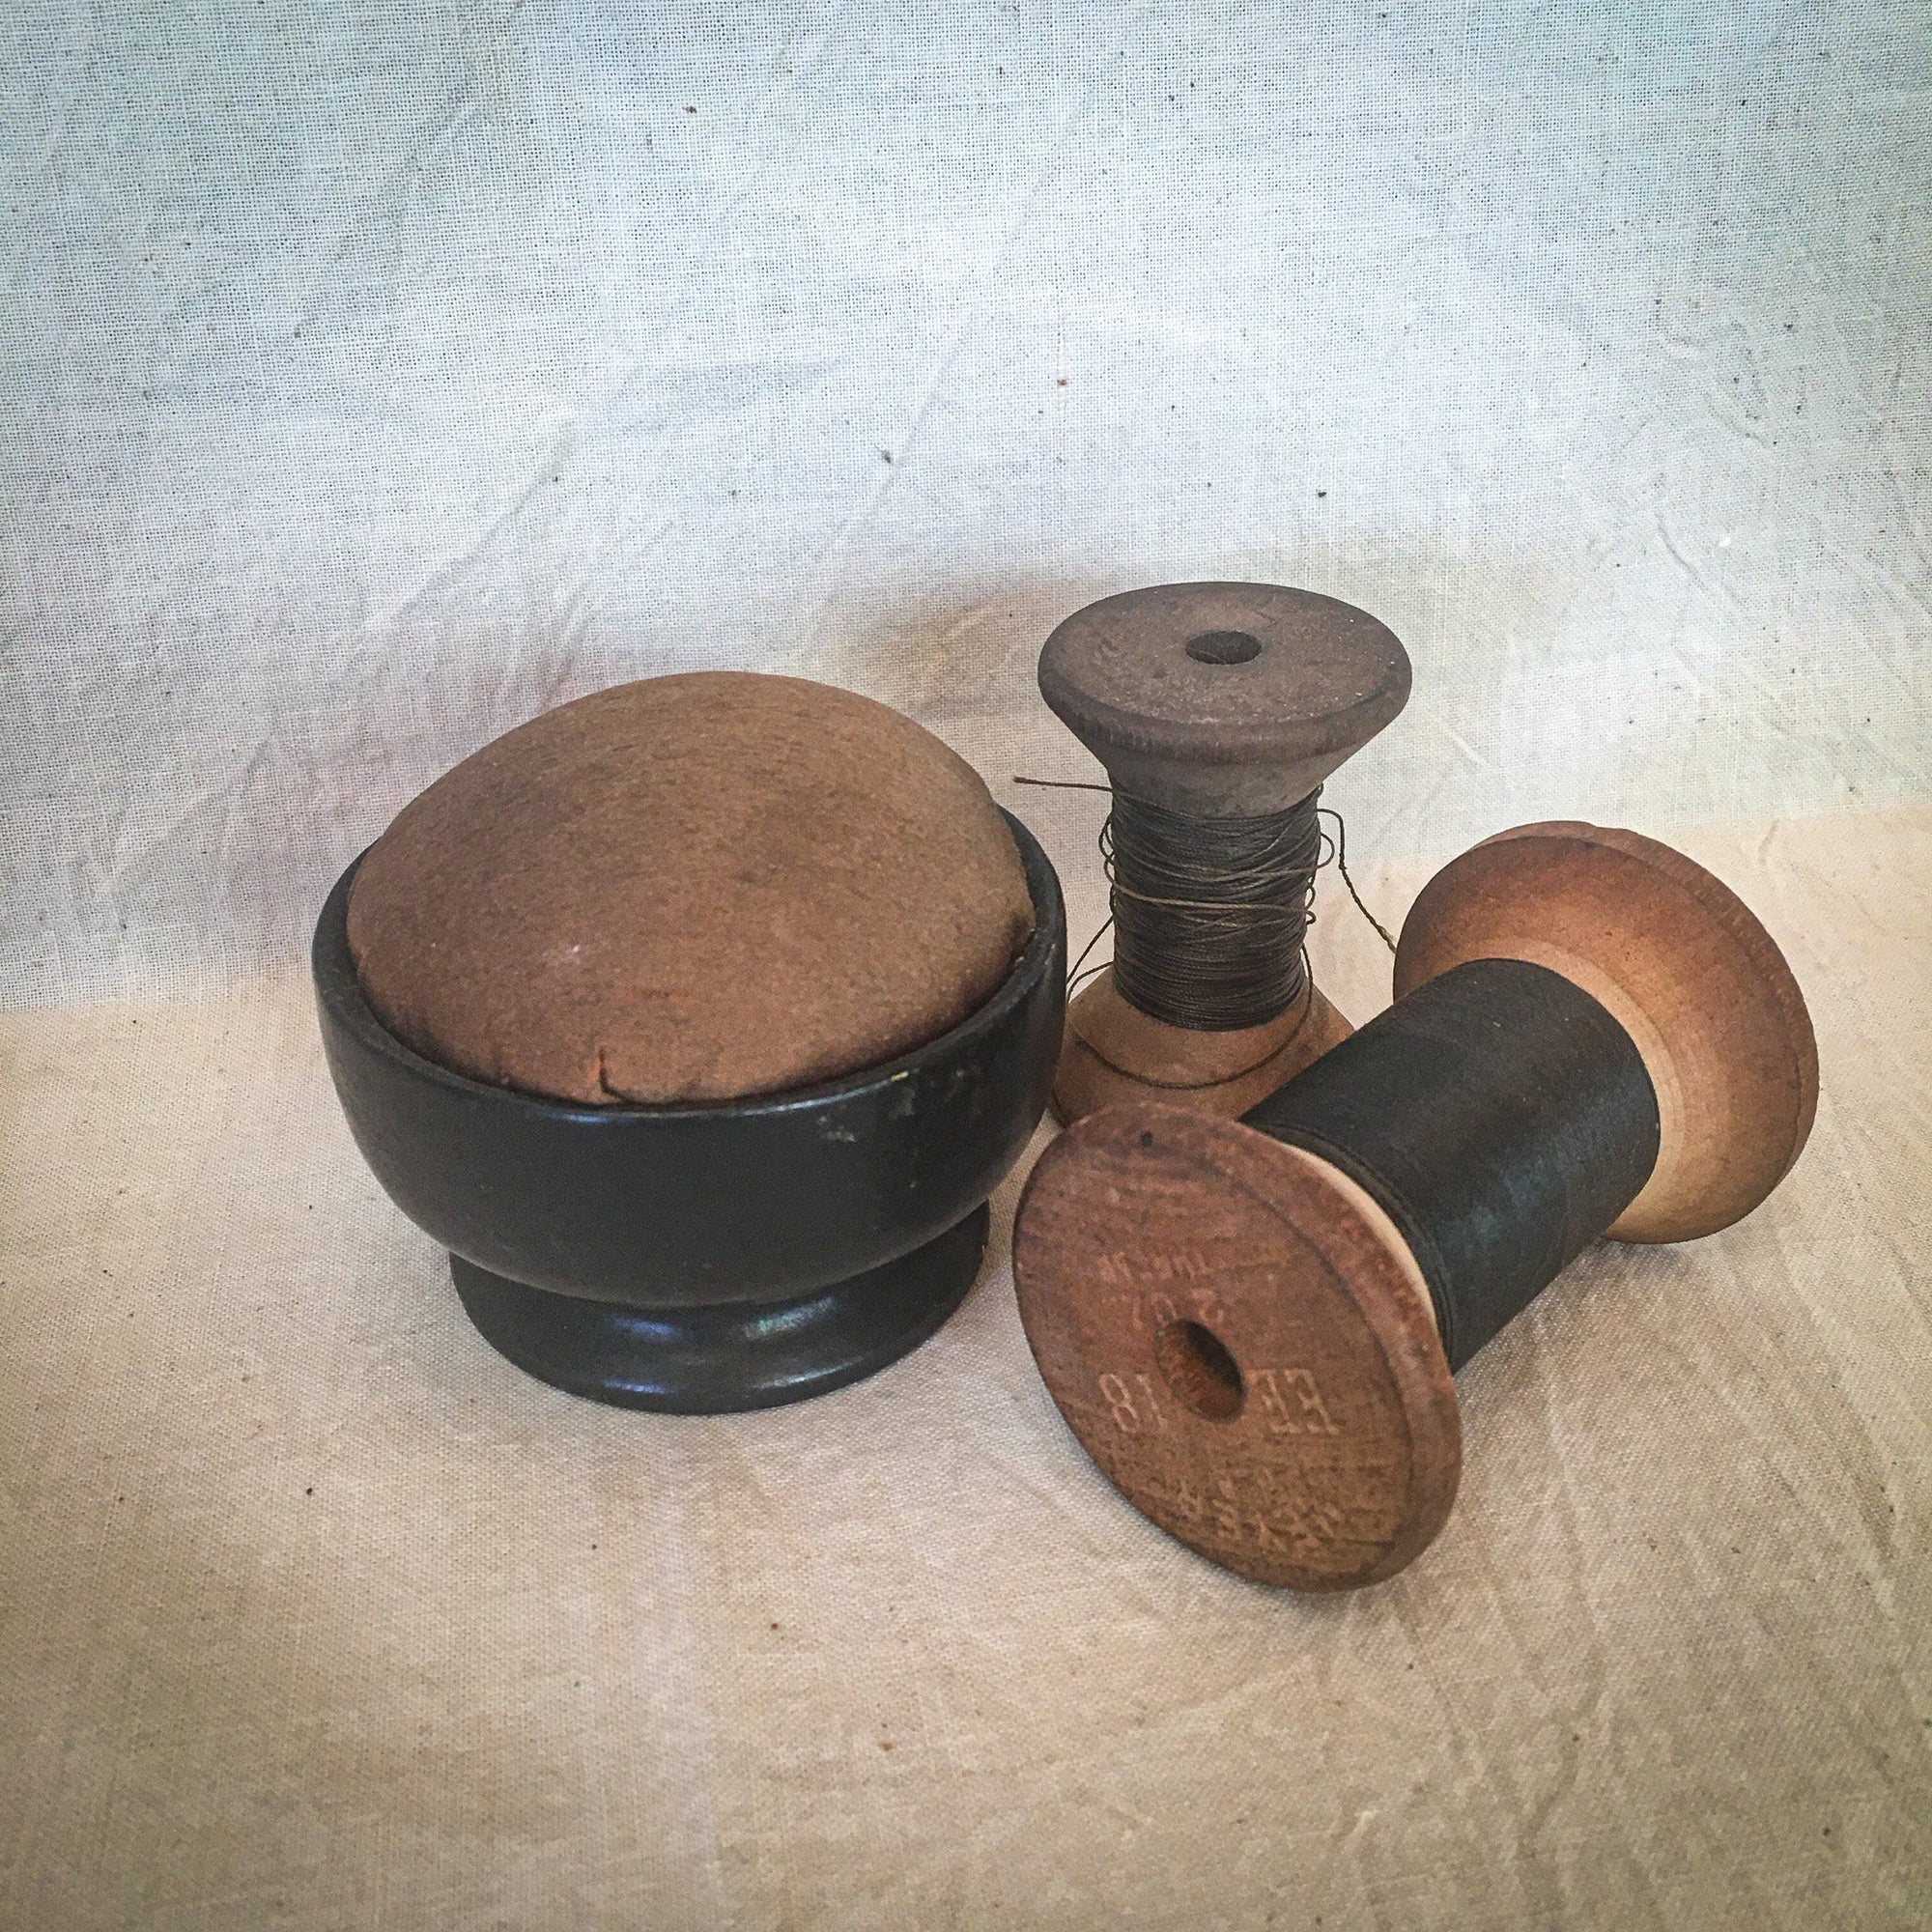 Vintage Silk and Wood Pin Cushion with 2 Wooden Thread Spools